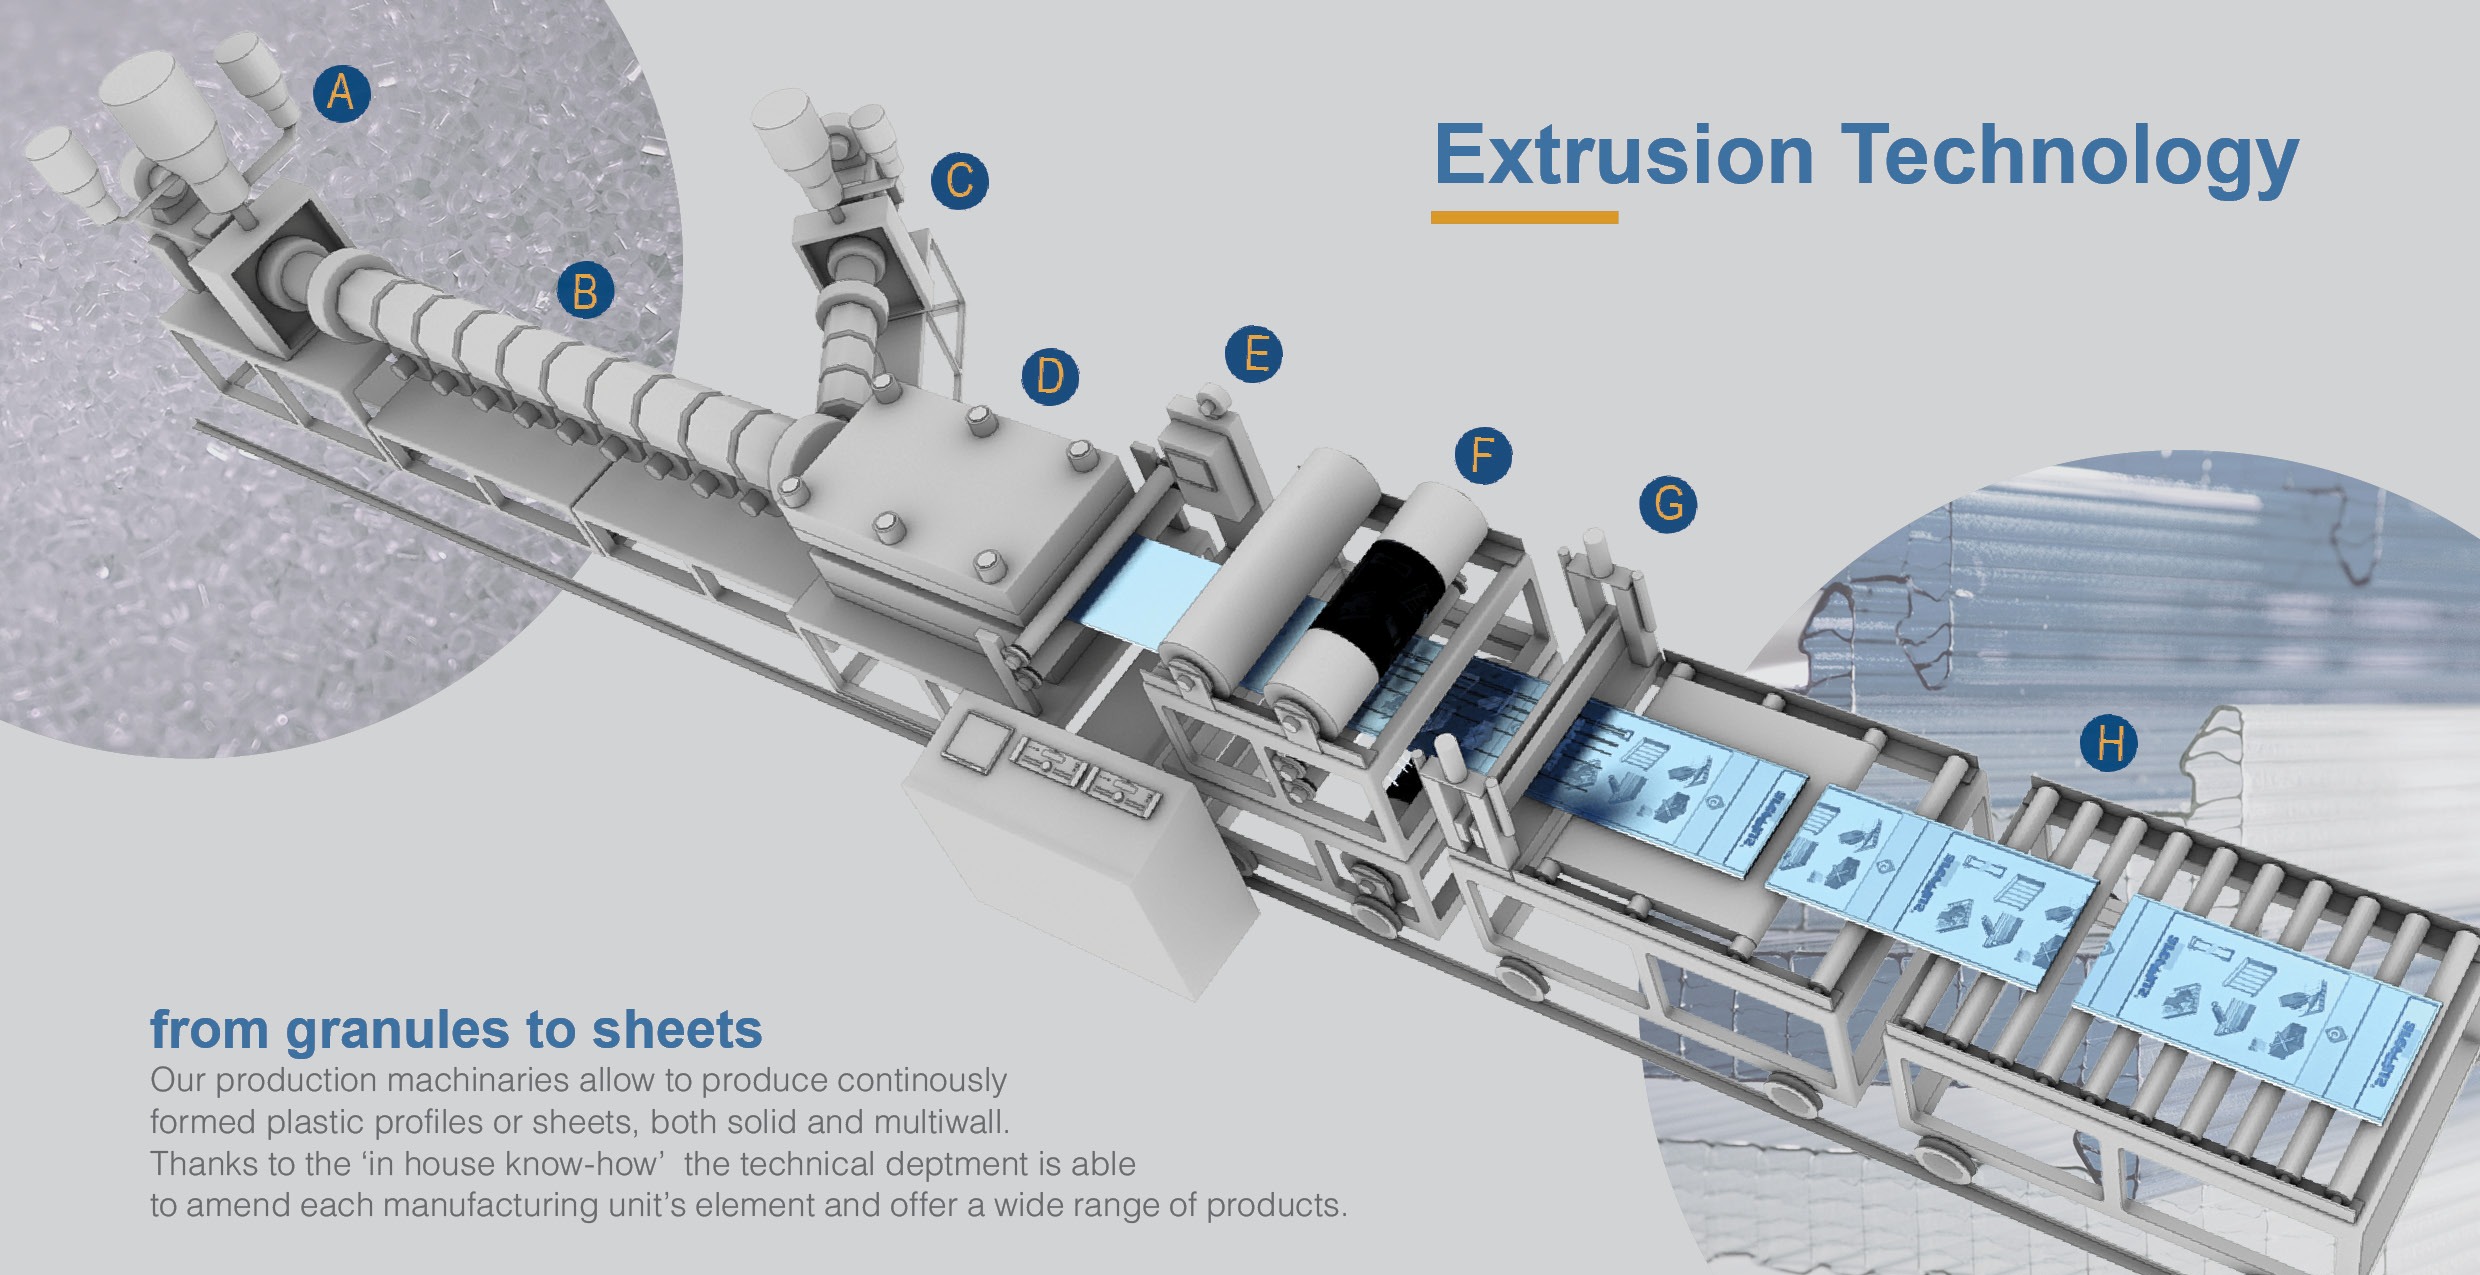 Extrusion Technology